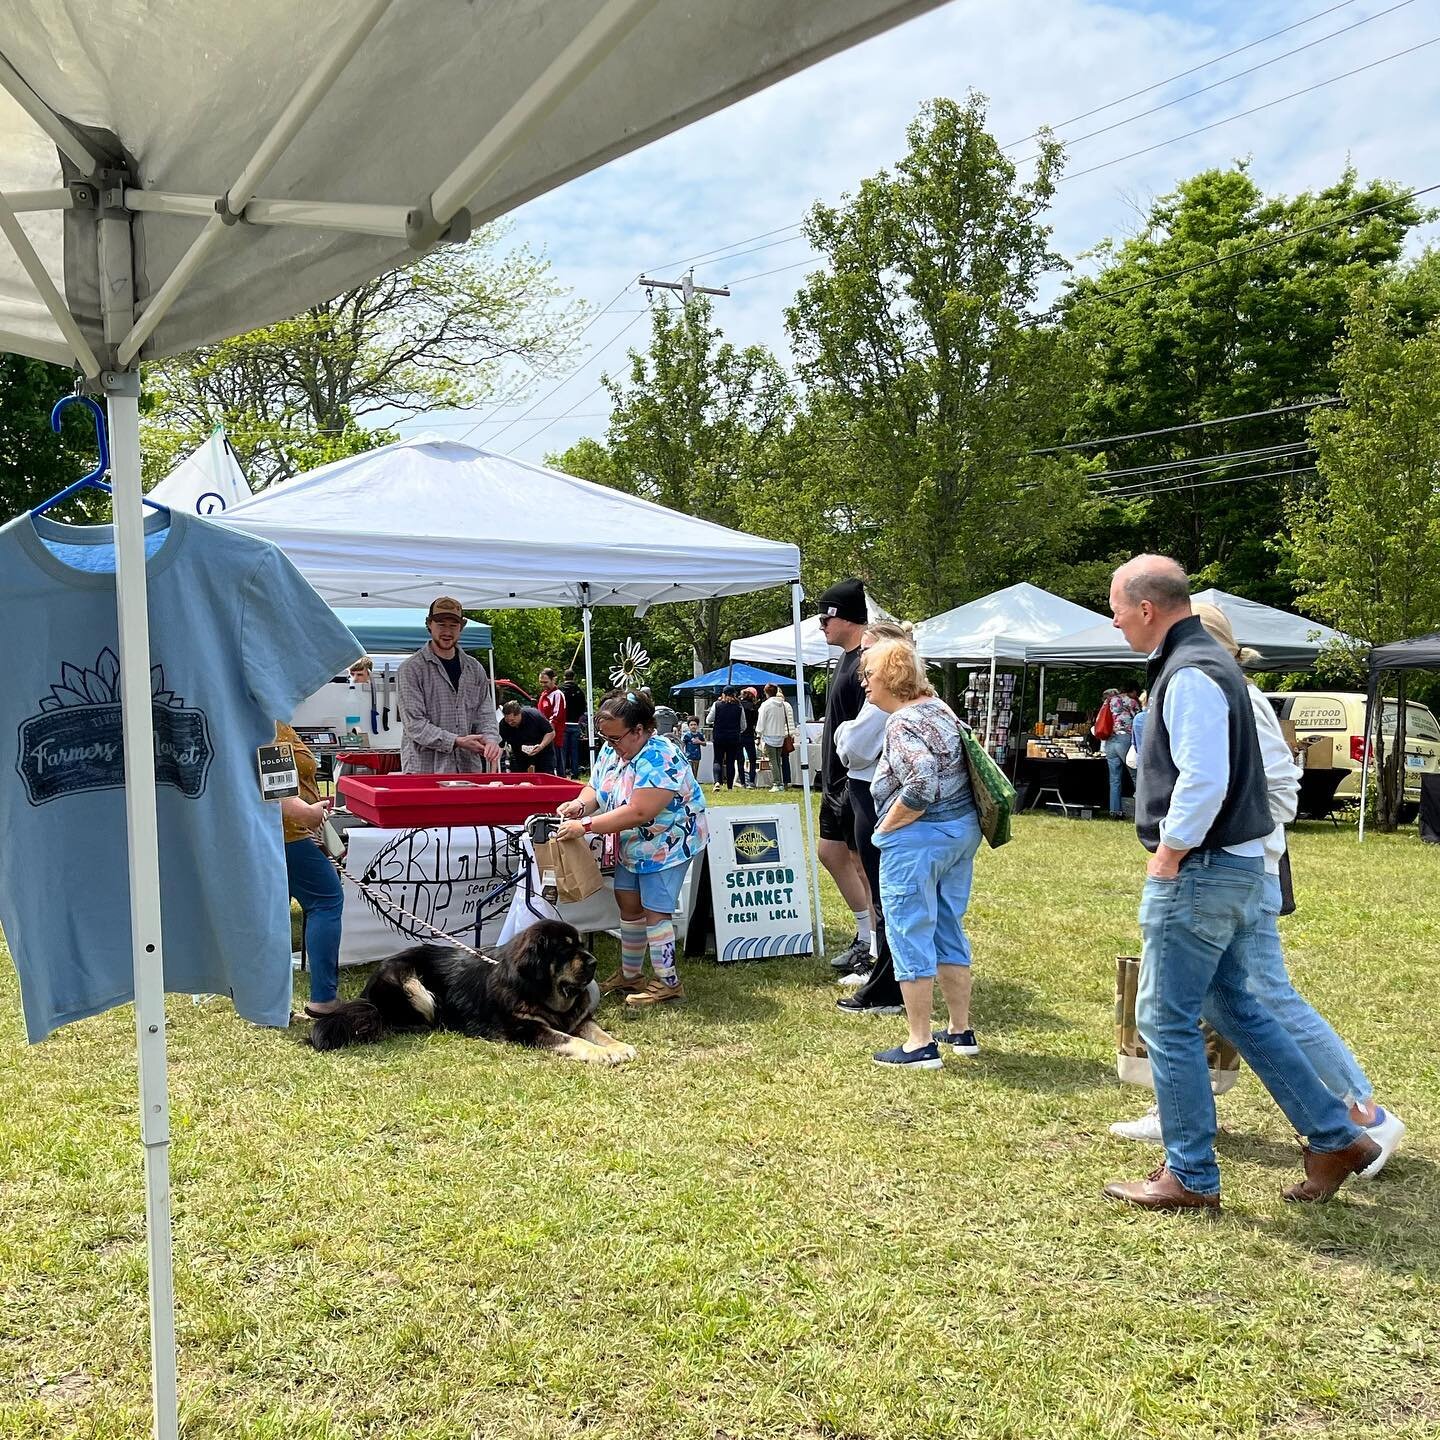 It&rsquo;s our first day outside at our NEW location. Join us! We are here from 10am-1:30 today, Sunday May 21st.

Find us at the Tiverton Town Farm Recreation Area,  3588 Main Road, RT. 77, Tiverton, RI 02878. Same 

More information at www.Tiverton